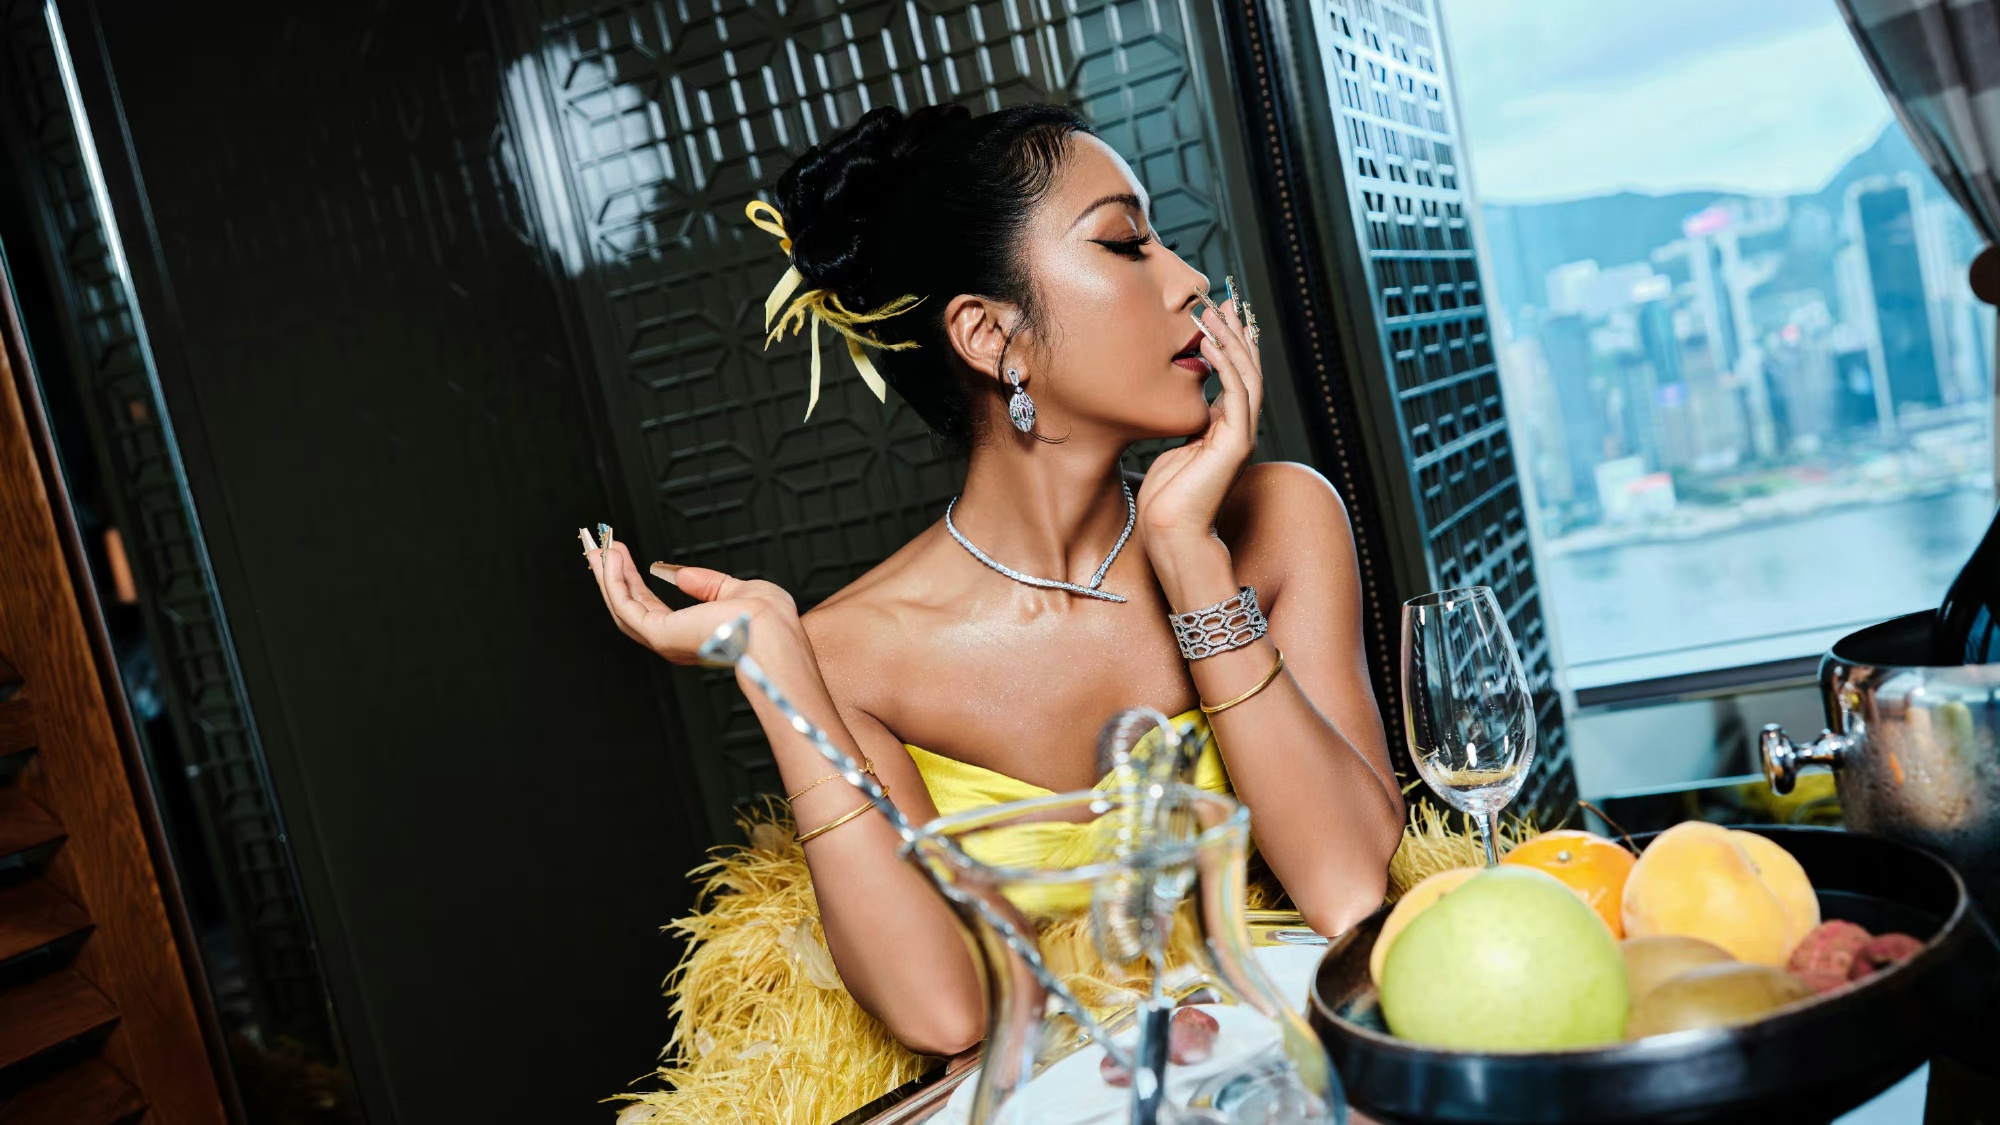 Bulgari is taking the heat in China for appearing to list Taiwan as an independent country on its website. What are the lessons for luxury? Photo: Bulgari